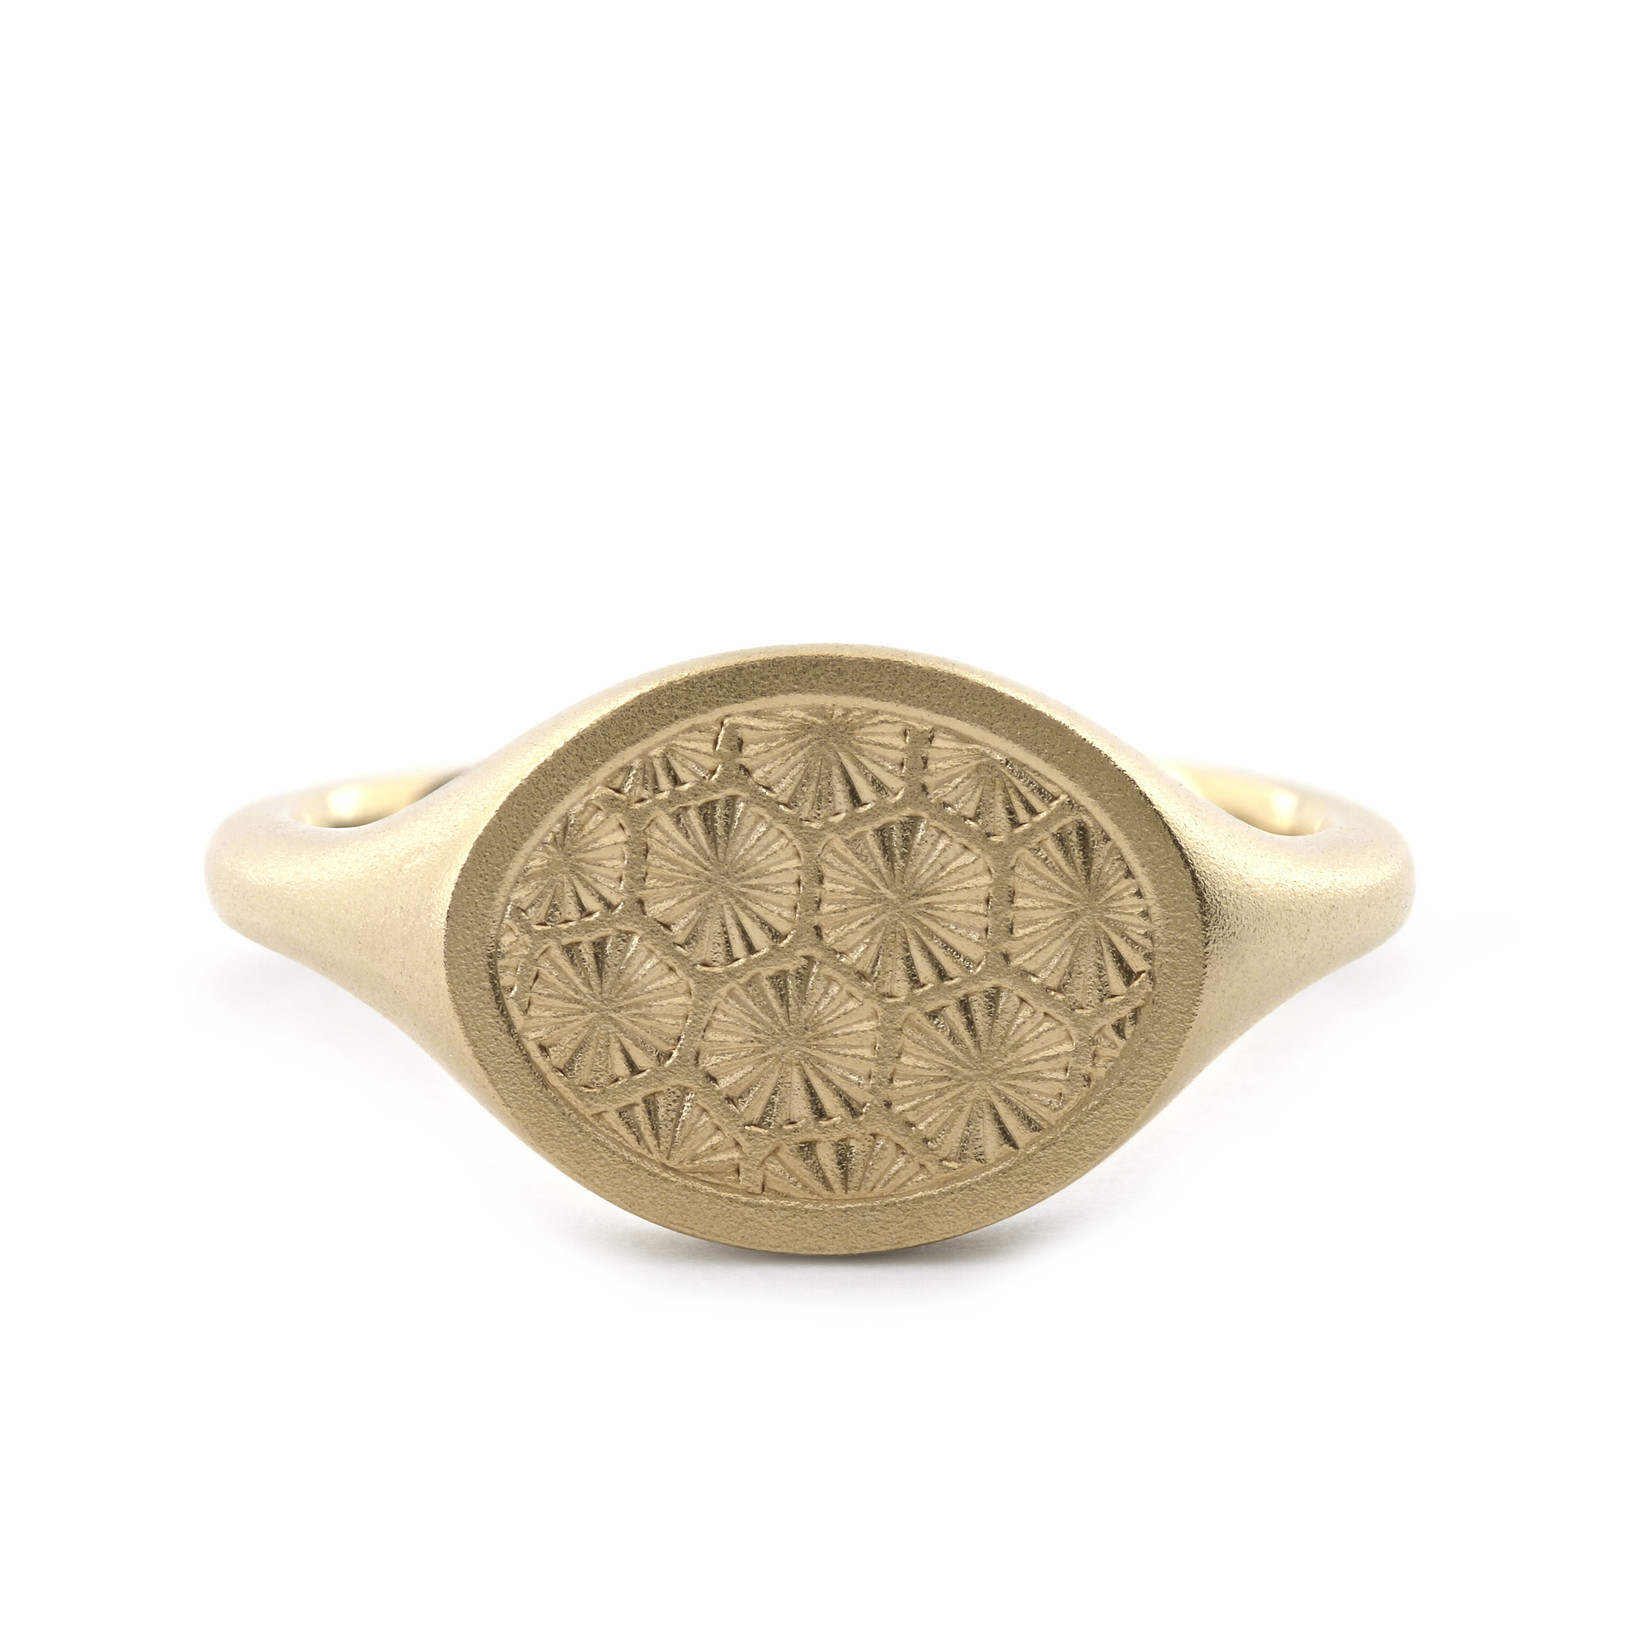 Baxter Moerman Oval Signet Ring with Petoskey Engraving